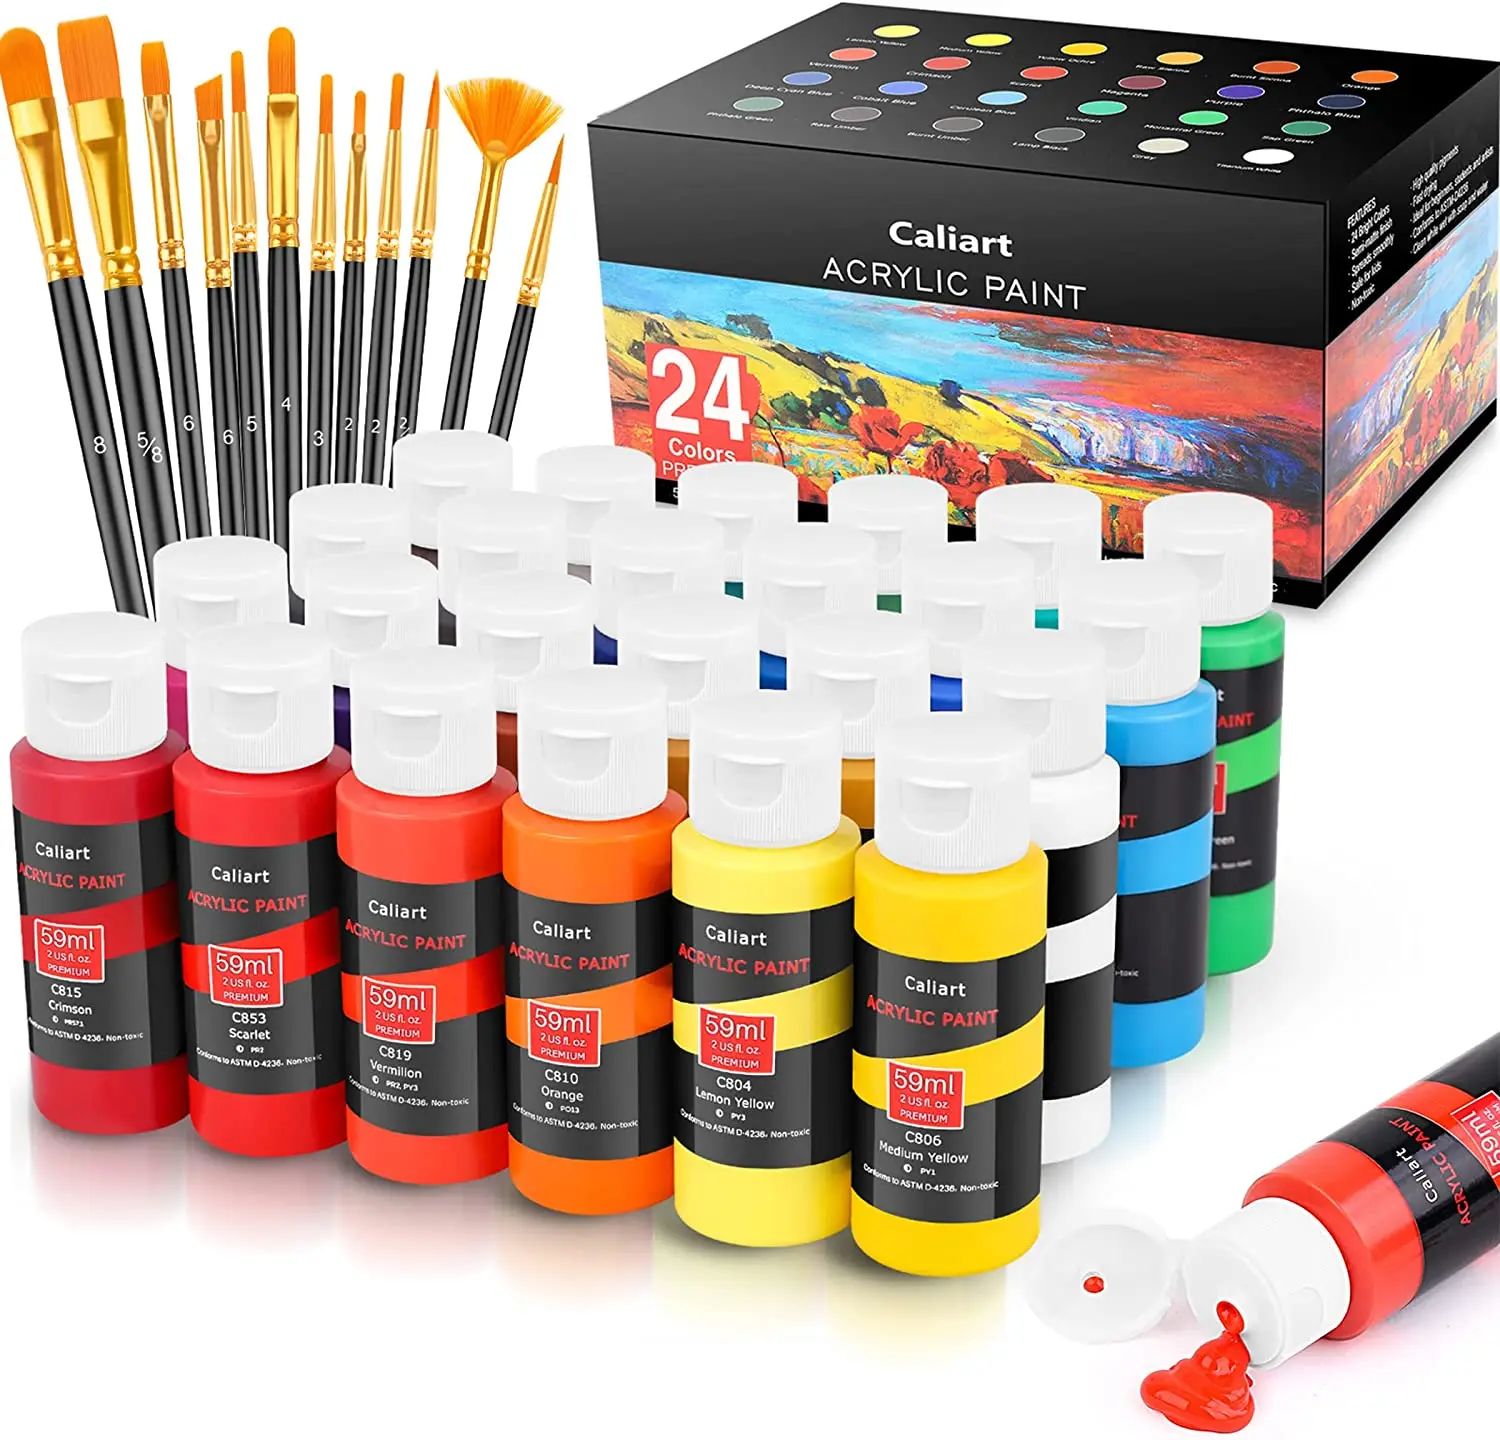 

Acrylic Paint Set With 12 Brushes, 24 Colors (59ml, 2oz) Art Craft Paints for Artists Kids Students Beginners & Painters, Canvas